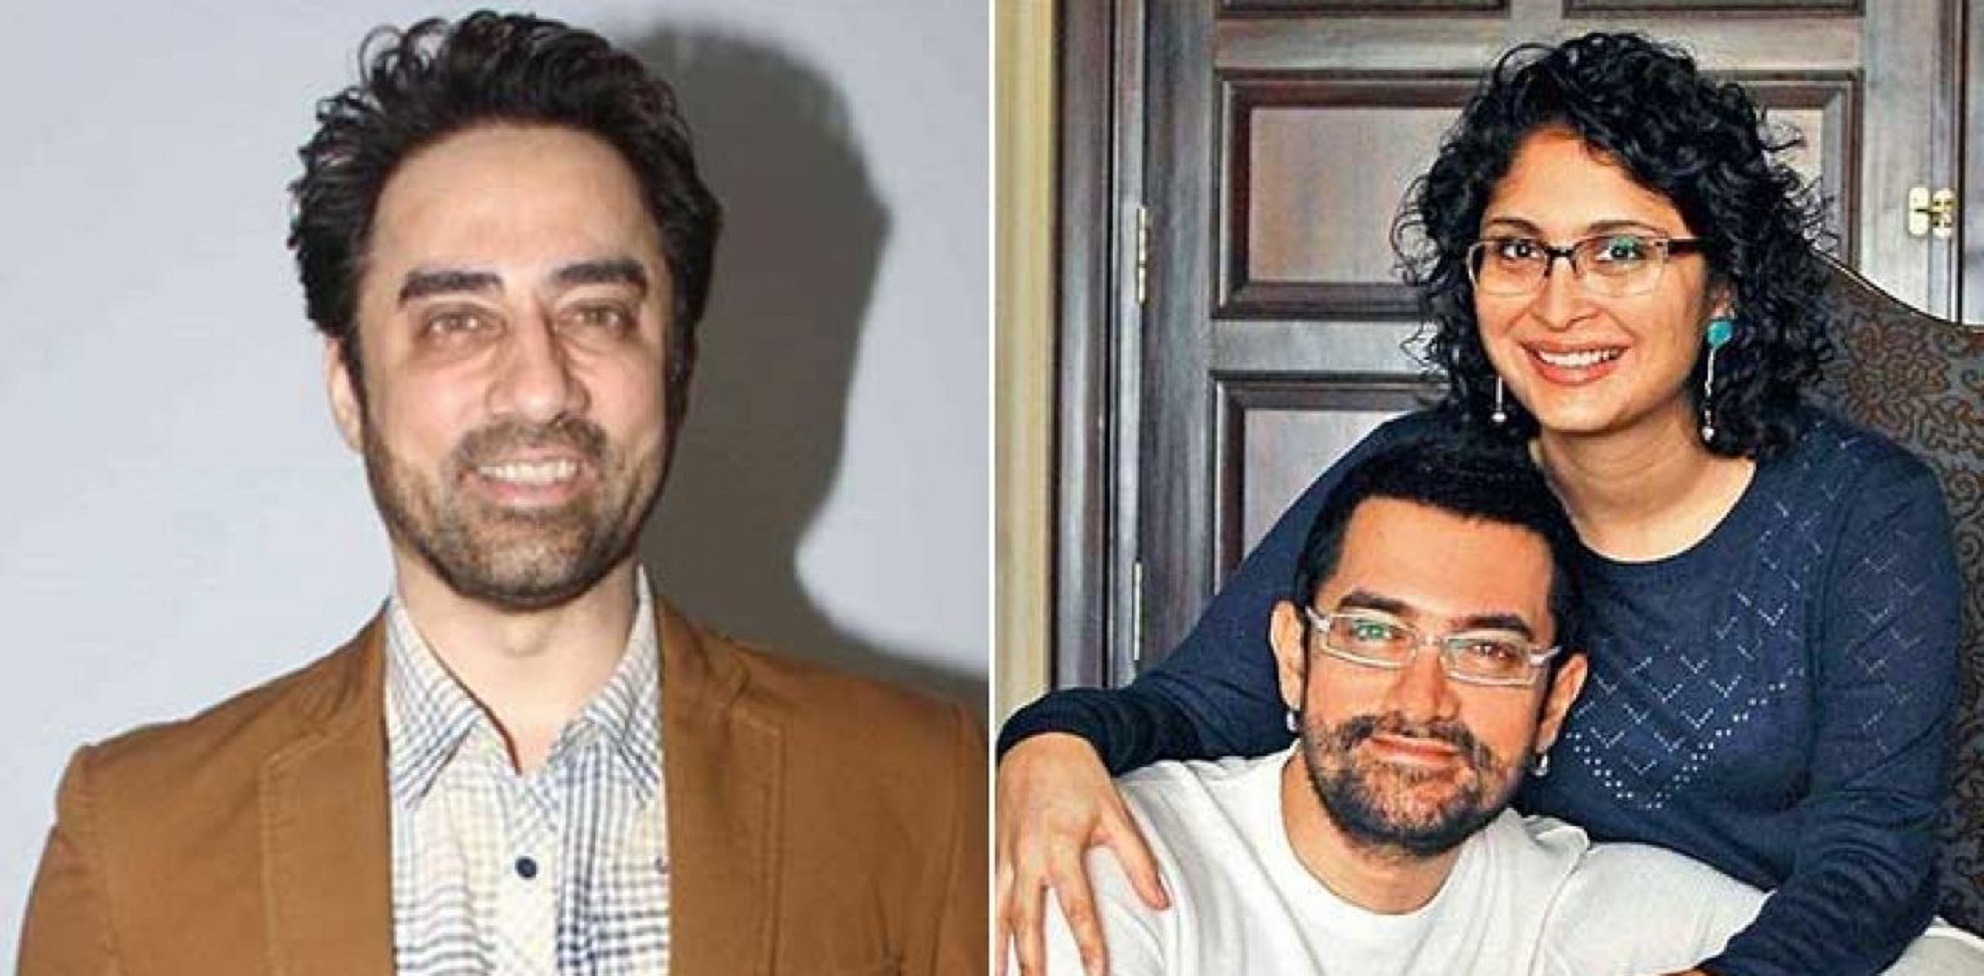 Aamir Khan’s Brother Faissal Says He Can’t Afford A Wife, “I Have Not Made Enough Money To Afford It”